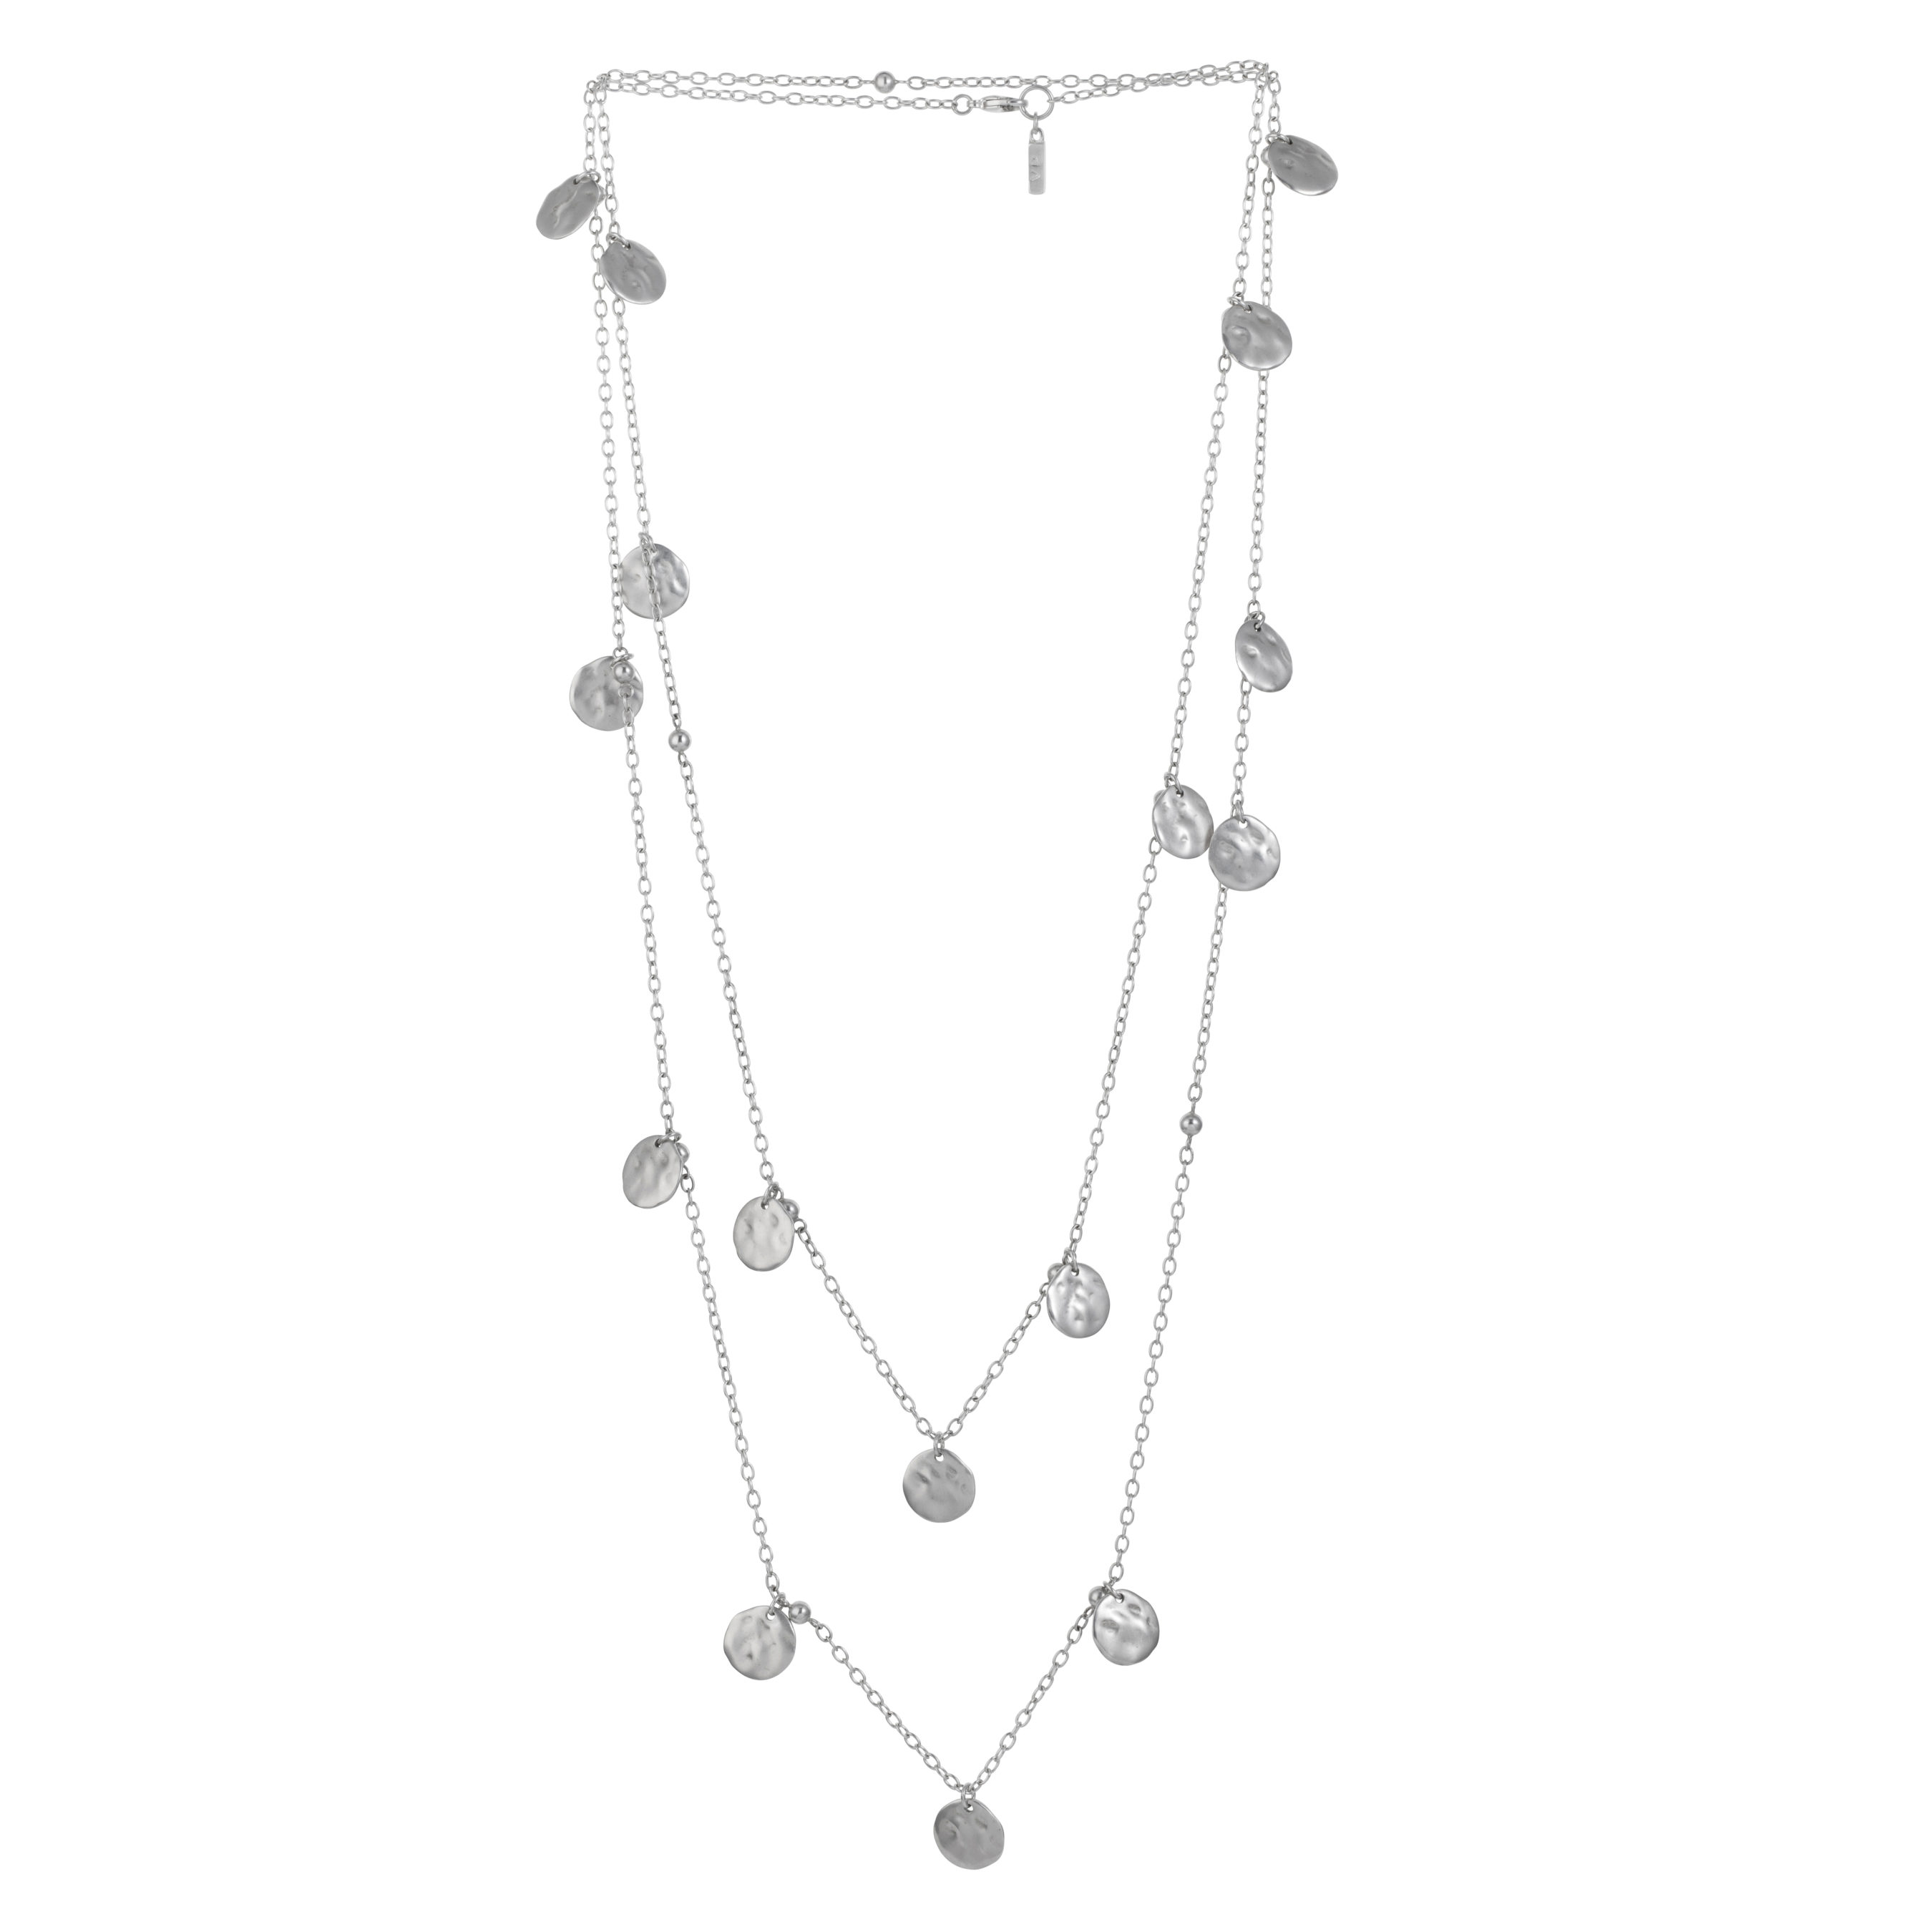 Silver Hammered Disc Chain Wrap Necklace | Van Peterson London